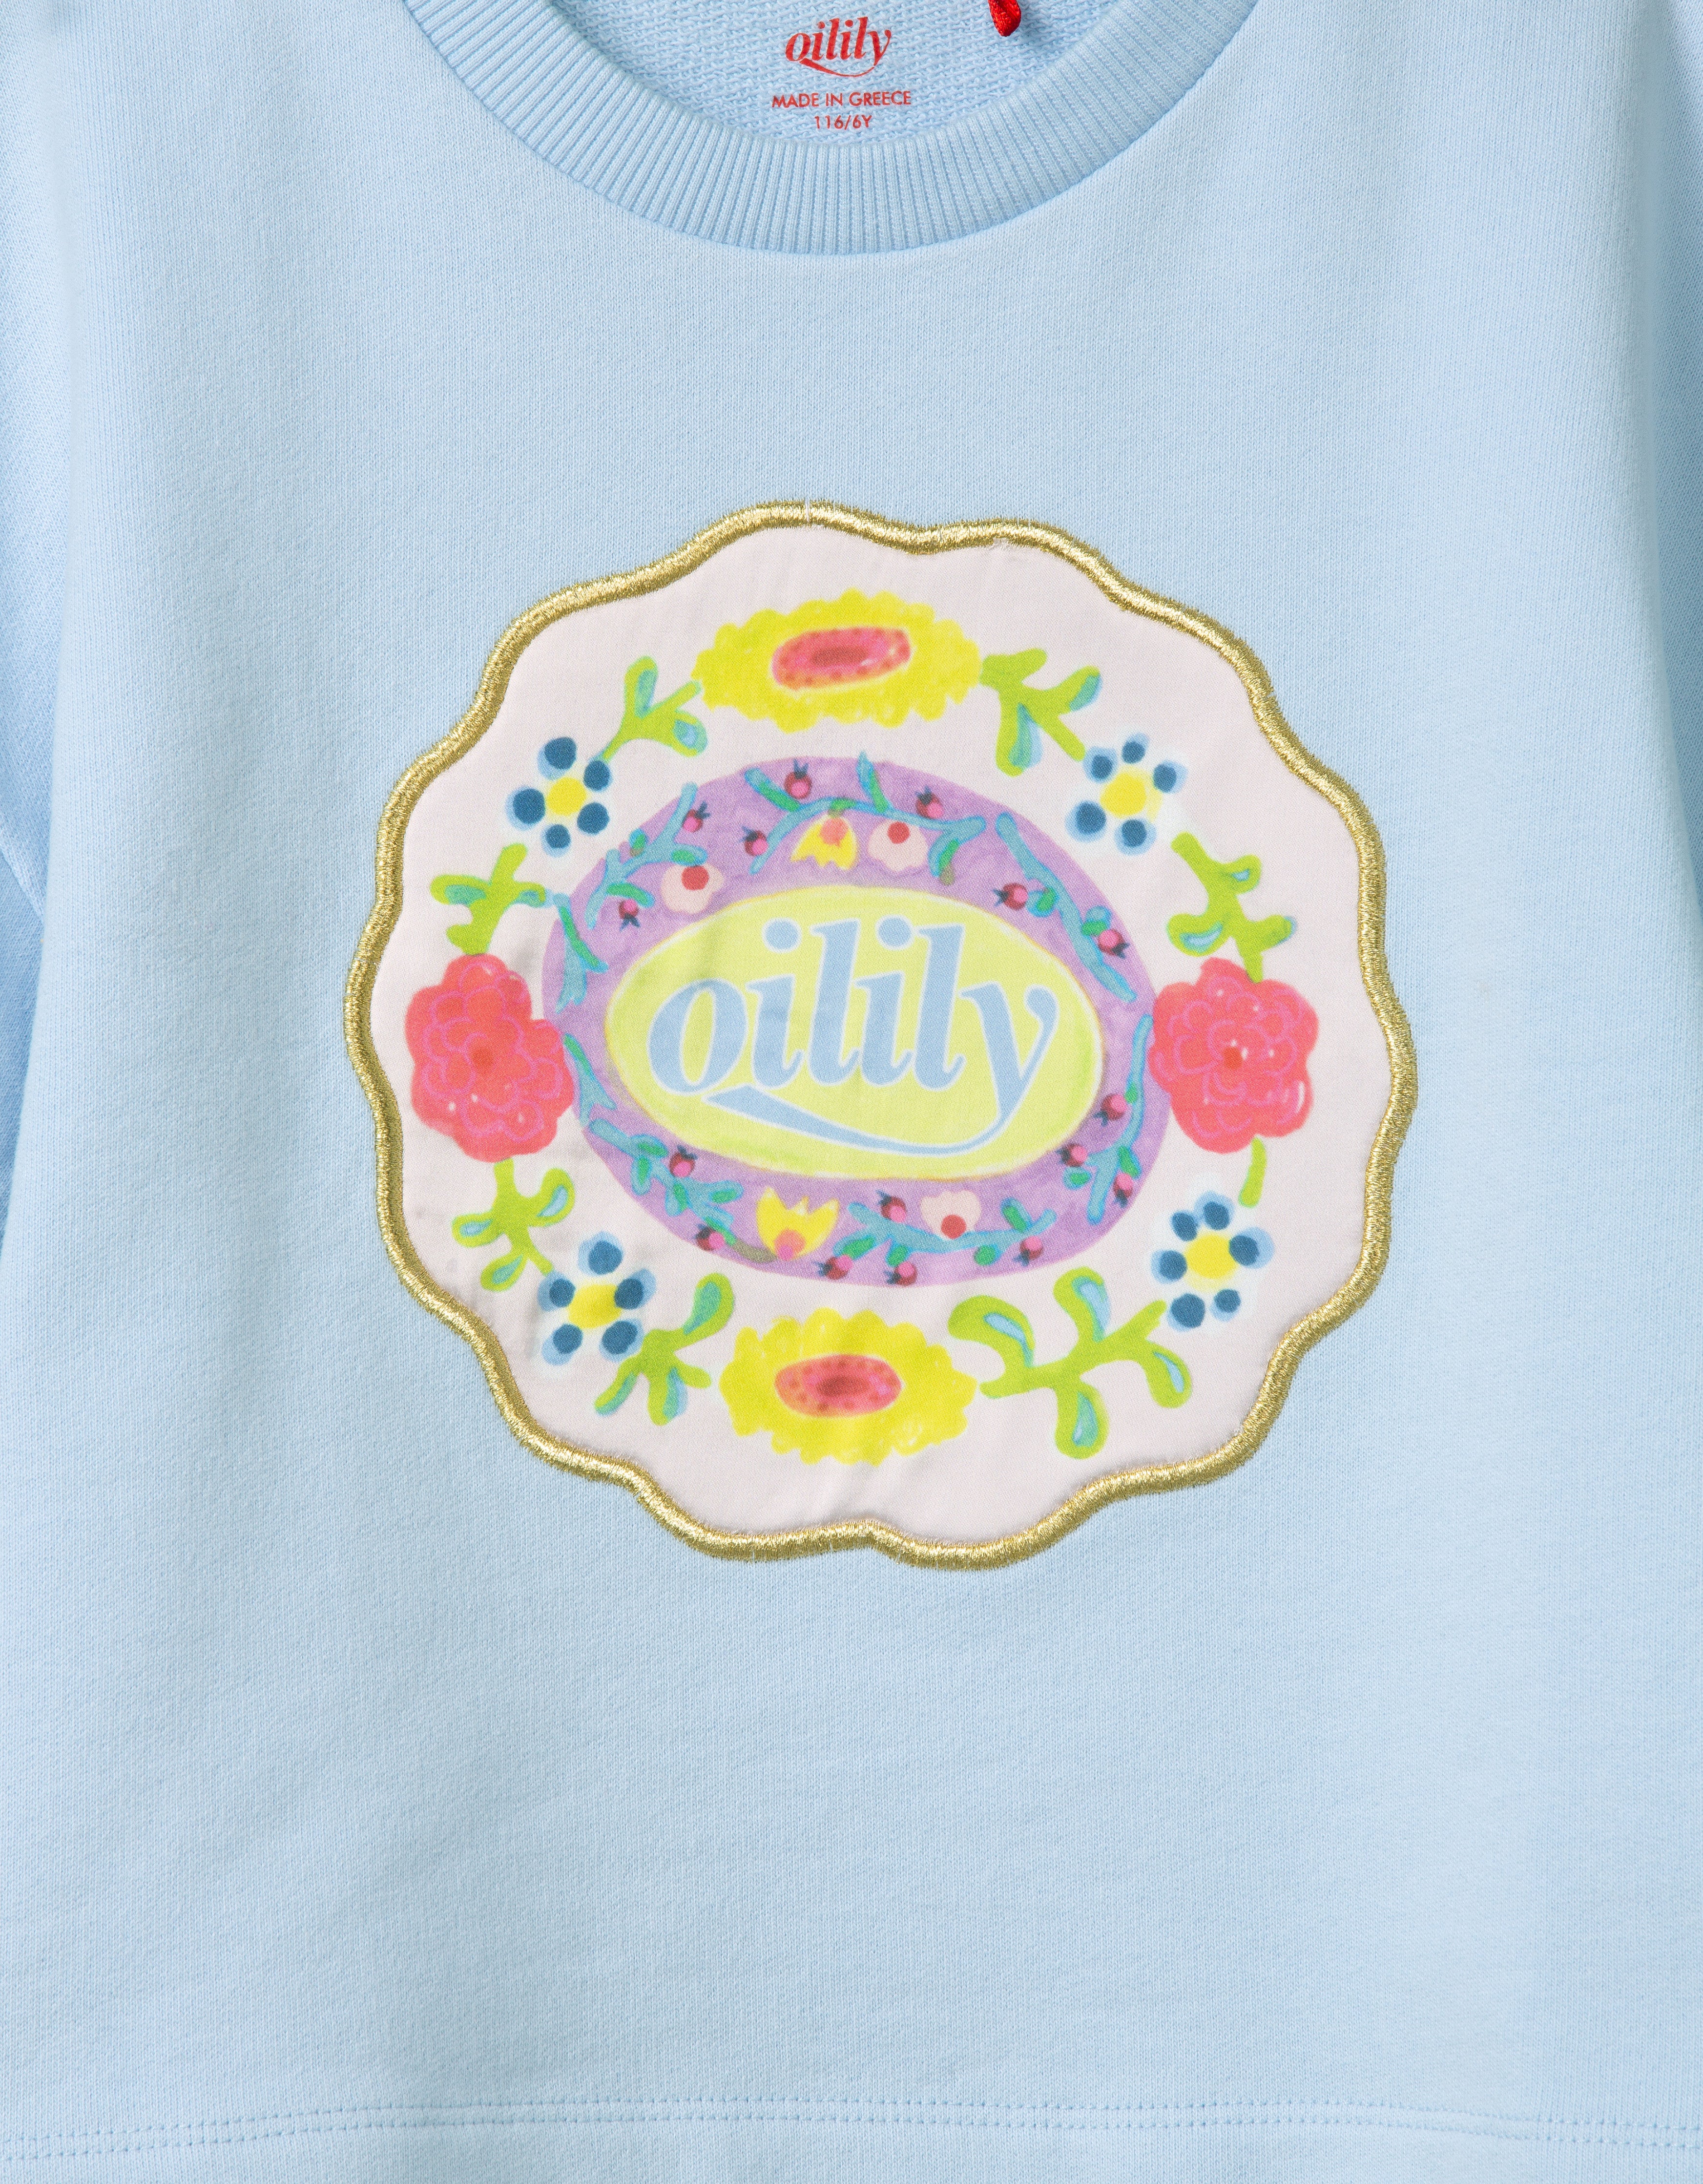 Oilily Hussel short sleeve sweater 62 solid sweat artwork round OILILY logo